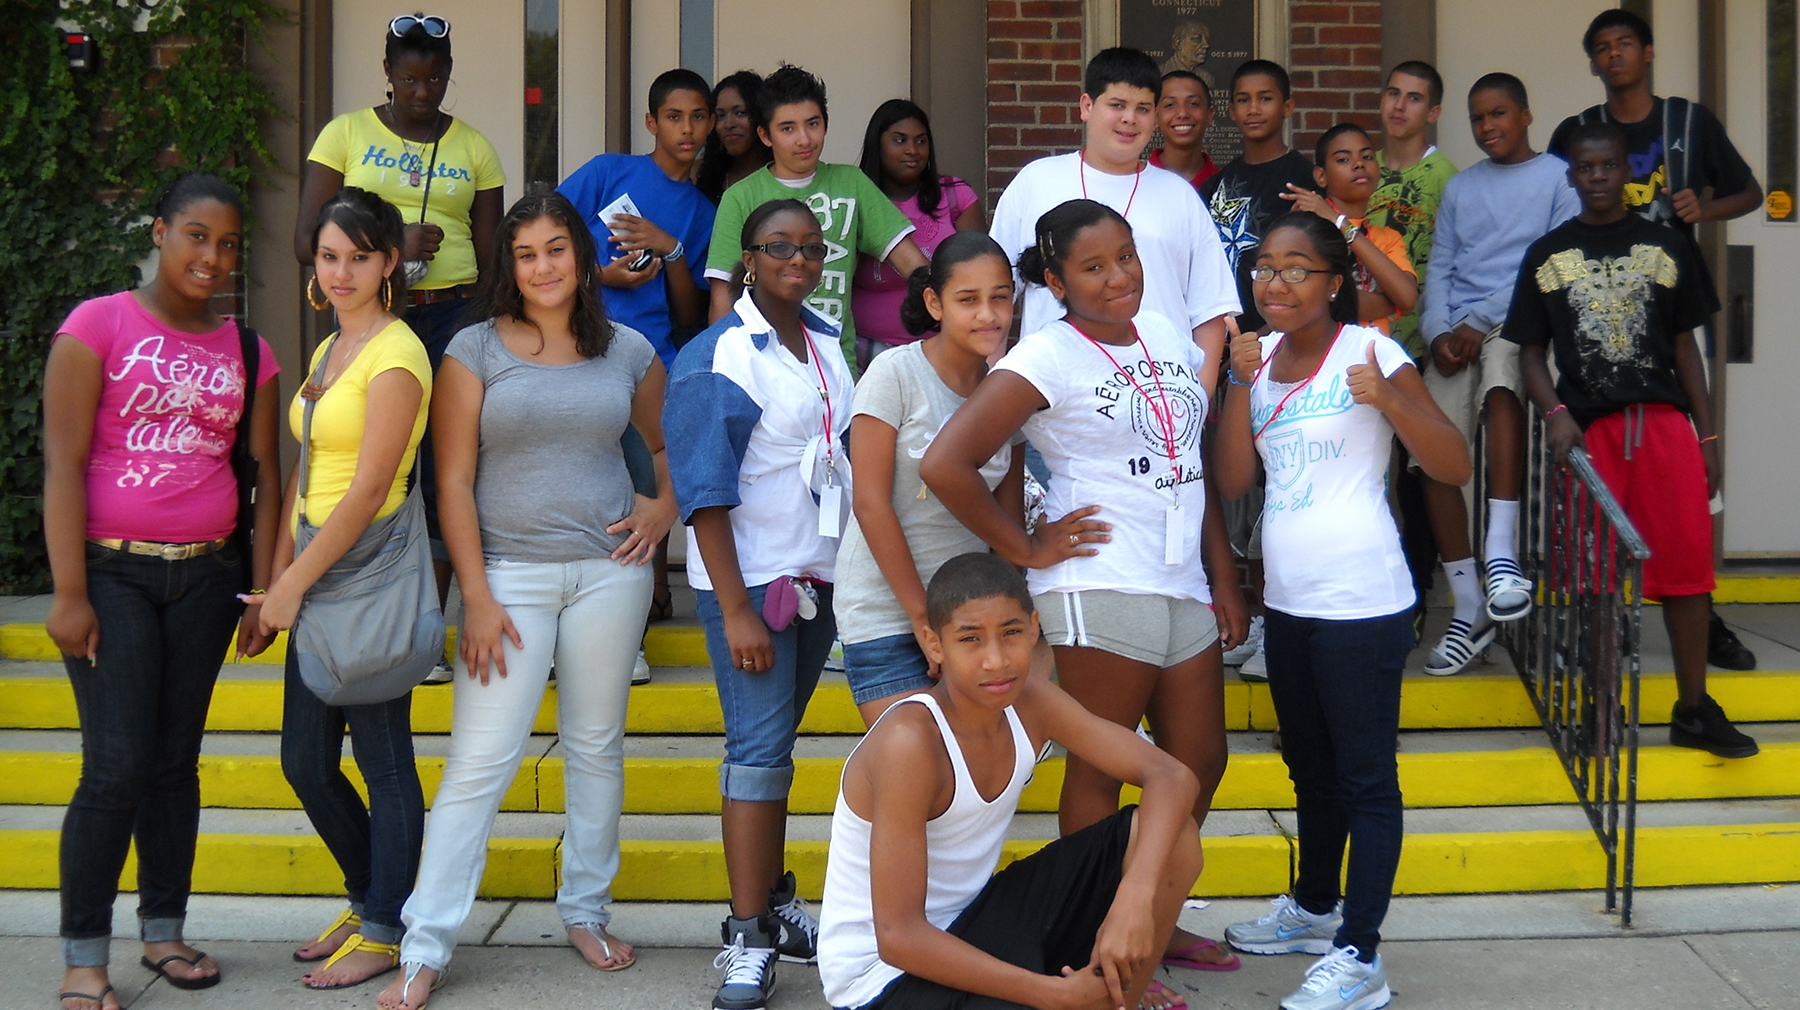 Some of Our Teens in August 2013